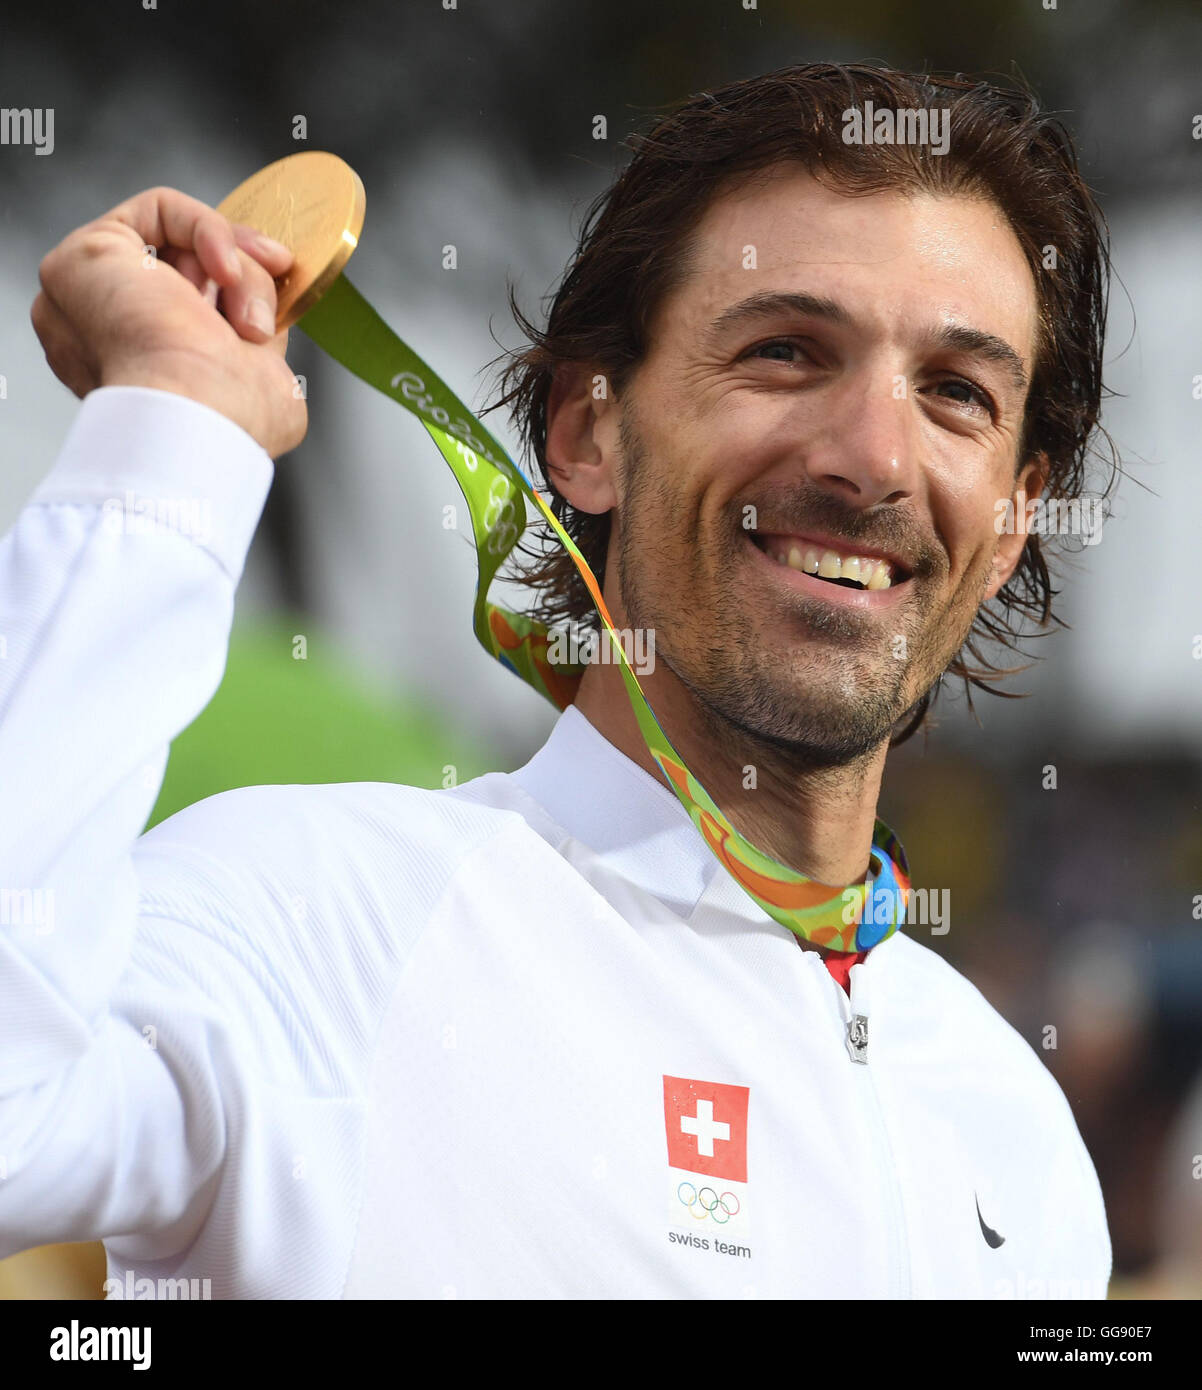 Rio de Janeiro, Brazil. 10th Aug, 2016. Fabian Cancellara of Switzerland celebrates on the podium with the gold medal after winning the men's Individual Time Trial of the Rio 2016 Olympic Games Road Cycling events at Pontal in Rio de Janeiro, Brazil, 10 August 2016.Photo: Sebastian Kahnert/dpa/Alamy Live News Stock Photo